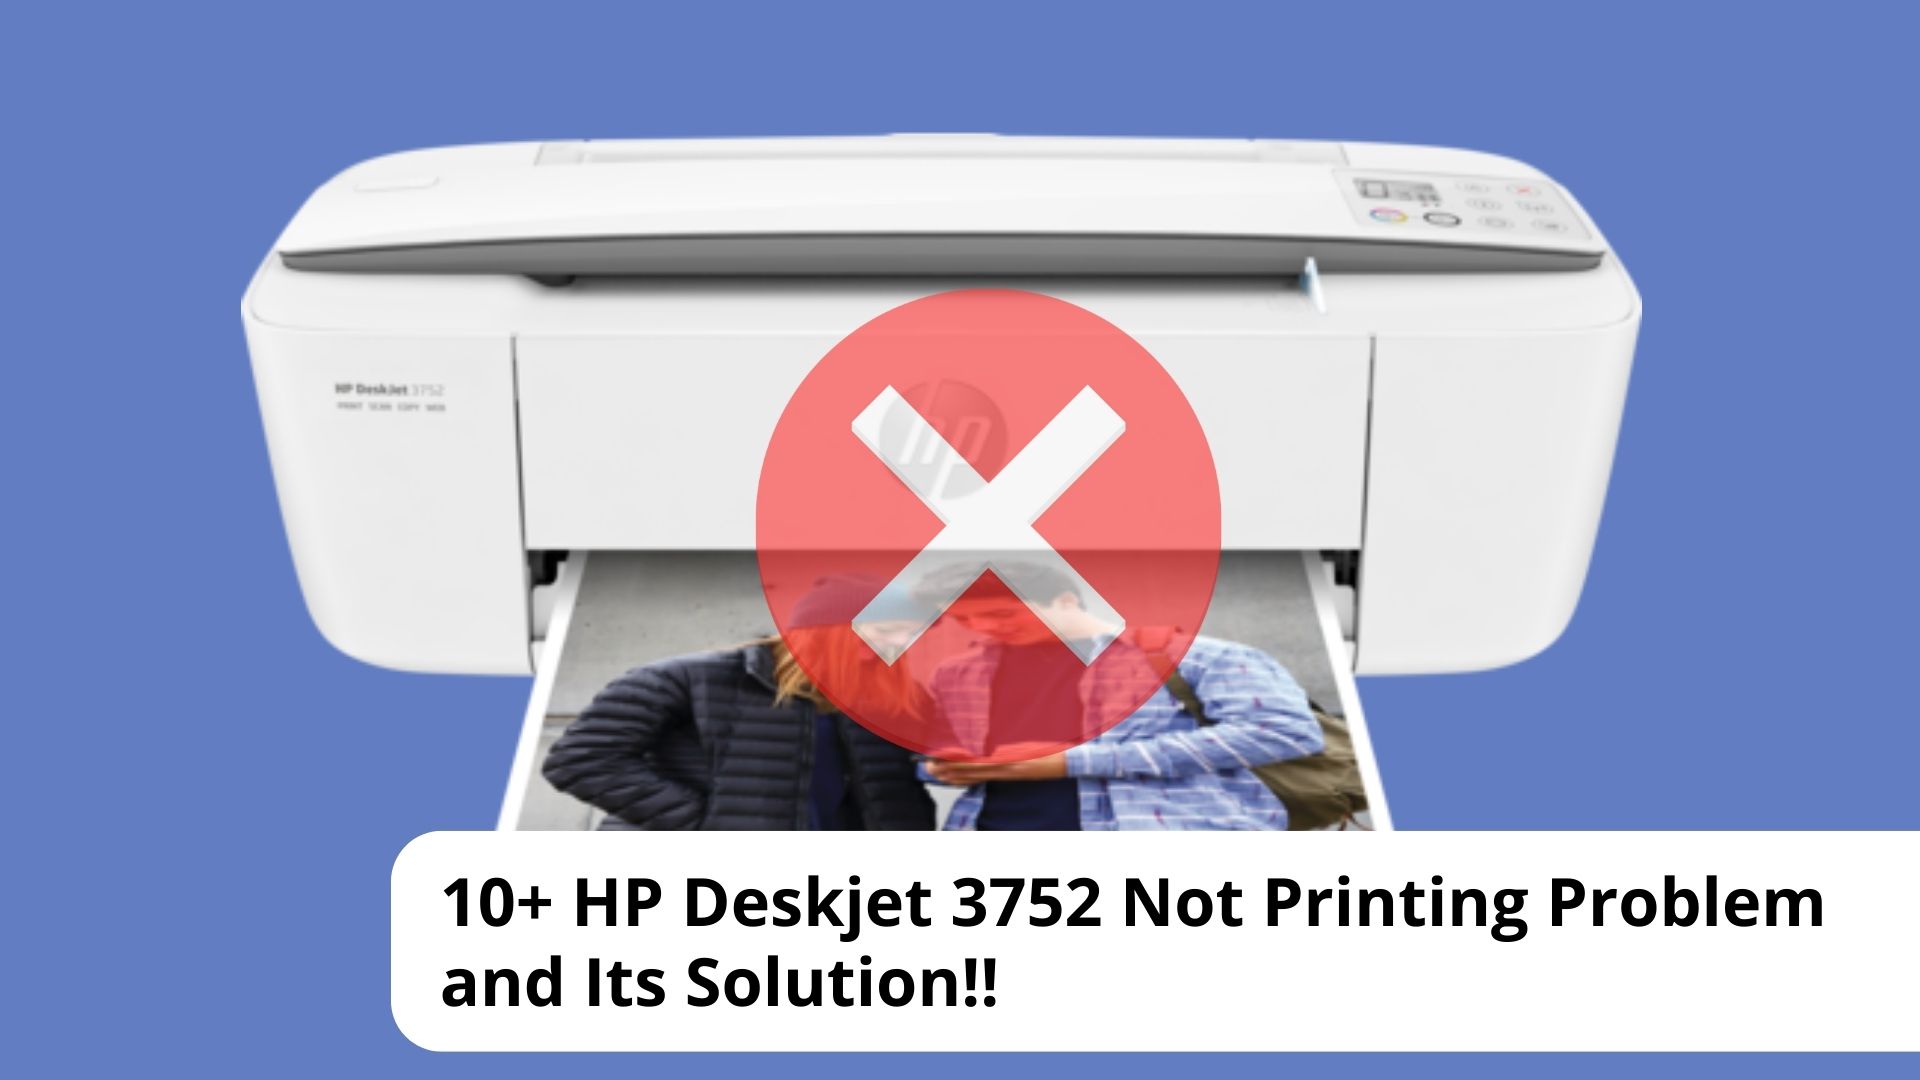 10+ HP Deskjet 3752 Not Printing Problem and Its Solution!!